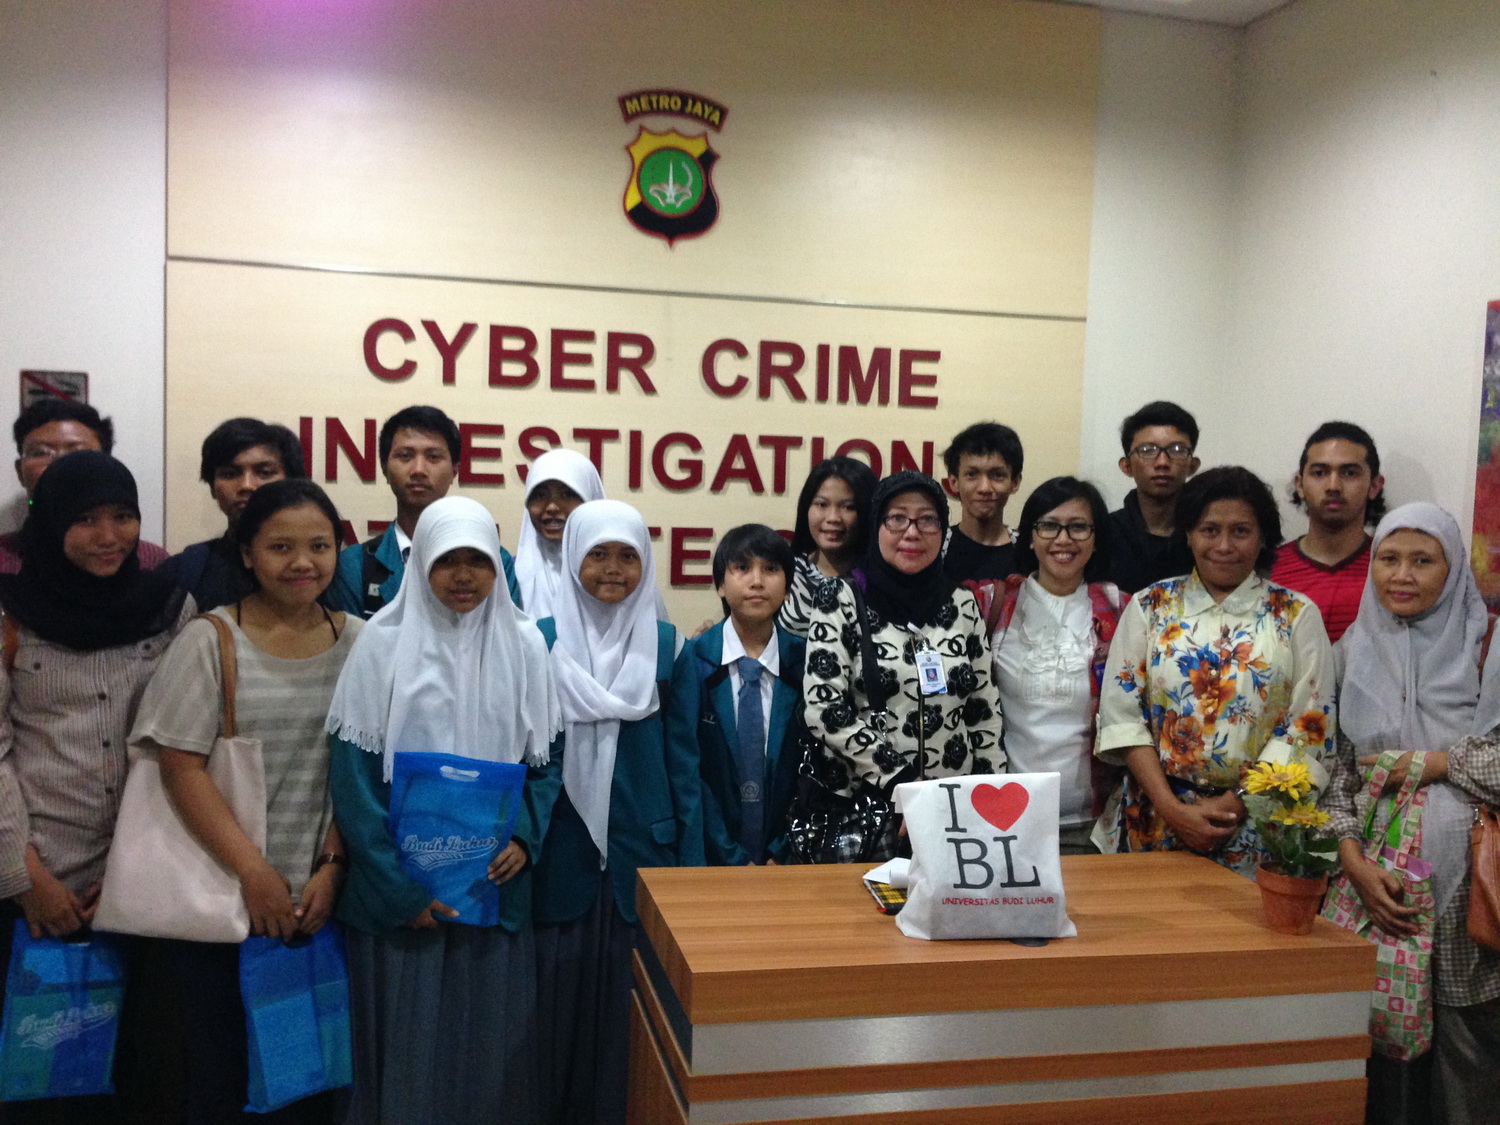 Seminar Kriminologi: “The Age of Cyberbullying and Cyberharassment”